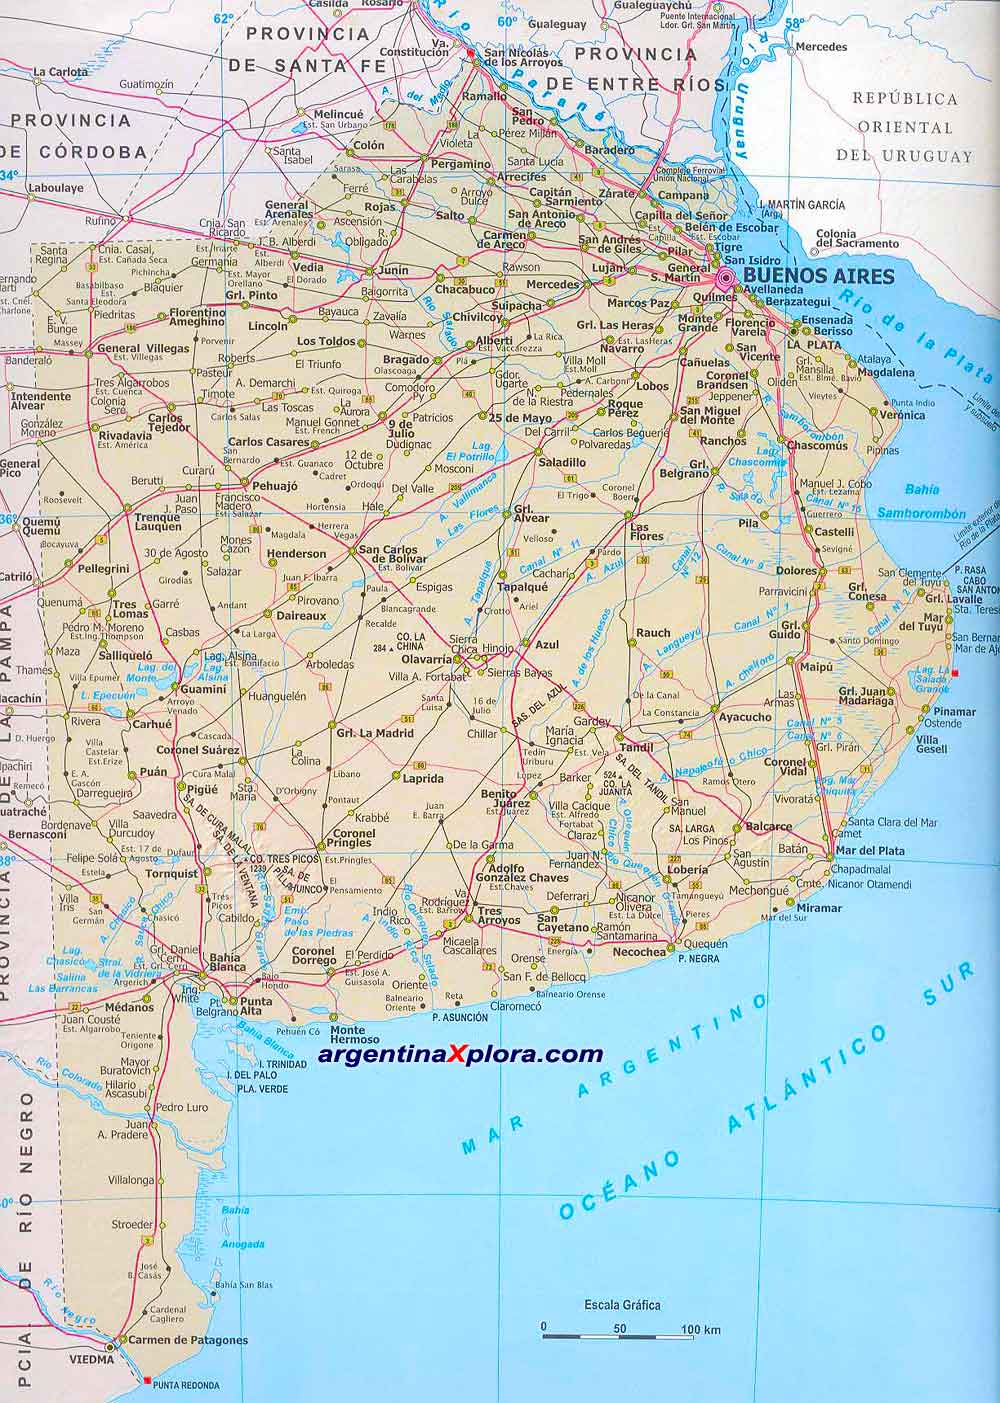 Road Map and Locations of Buenos Aires Argentina